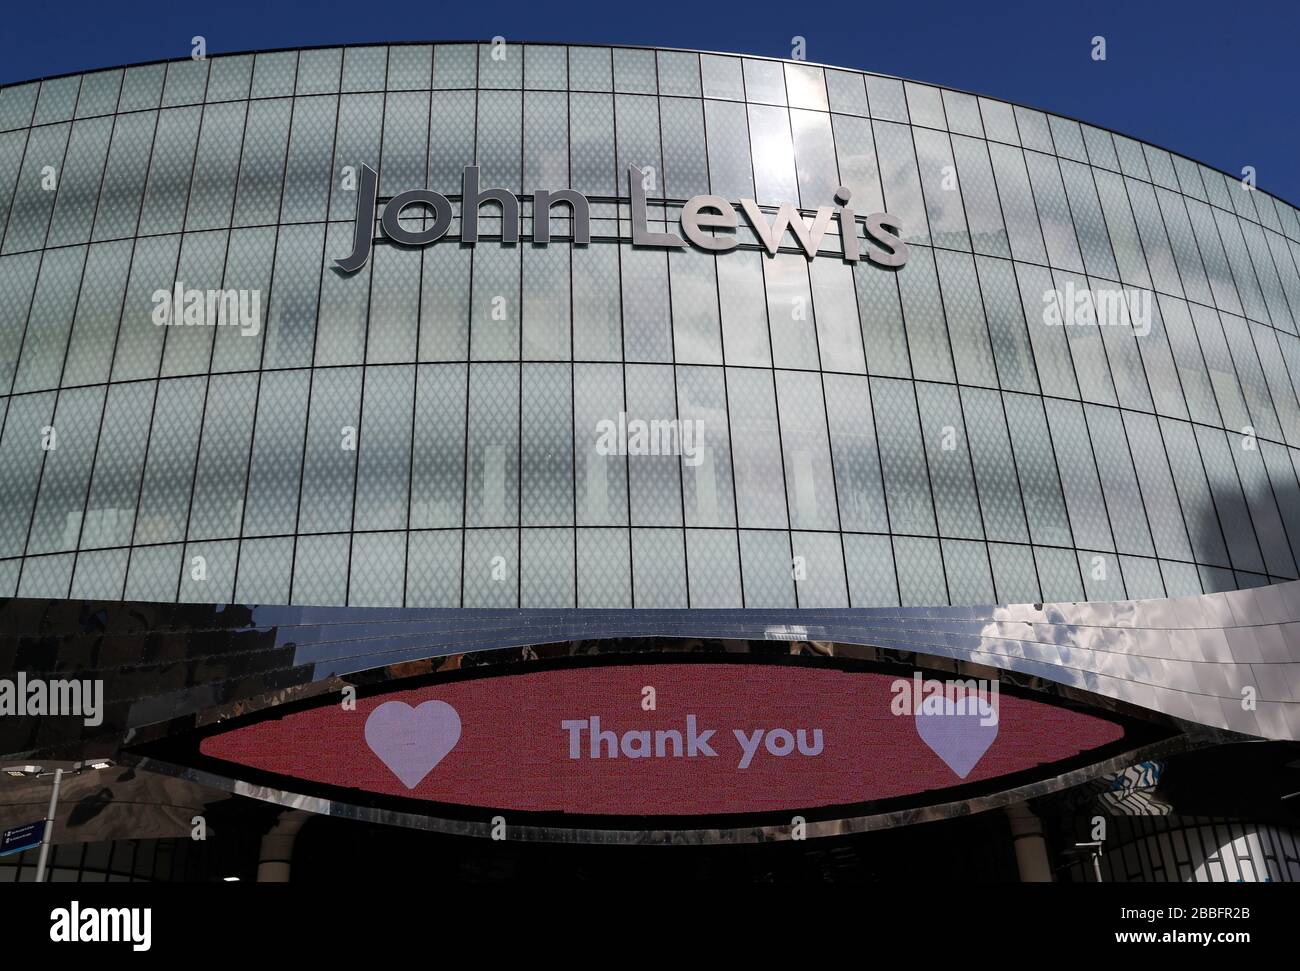 Birmingham, West Midlands, UK. 31st March 2020.  A screen on John Lewis thanks the NHS in Birmingham city centre during the Coronavirus pandemic lockdown. Credit Darren Staples/Alamy Live News. Stock Photo